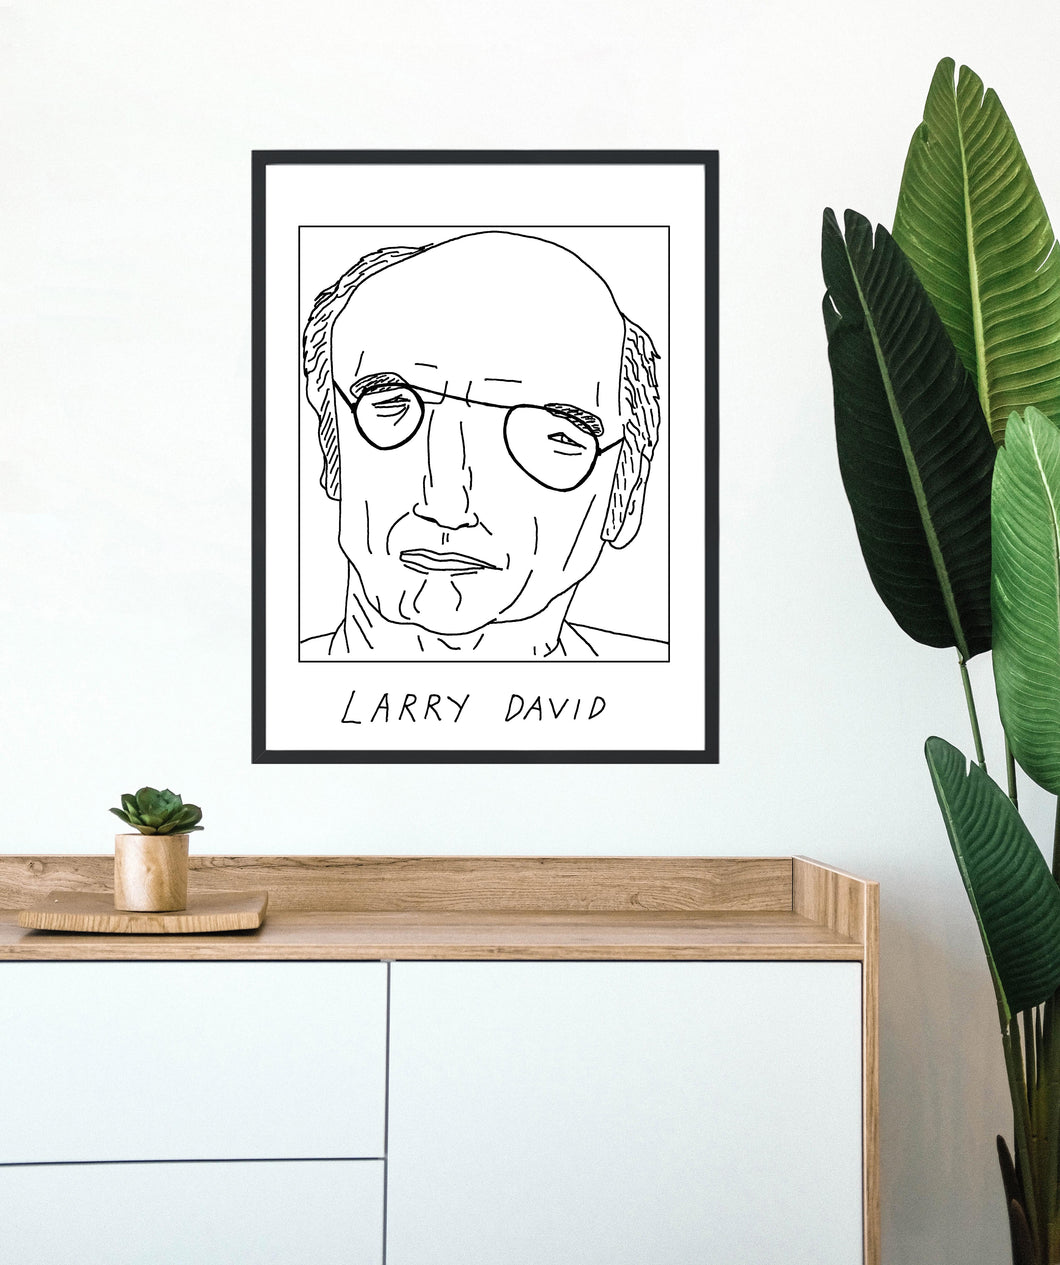 Badly Drawn Larry David - Poster - BUY 2 GET 3RD FREE ON ALL PRINTS